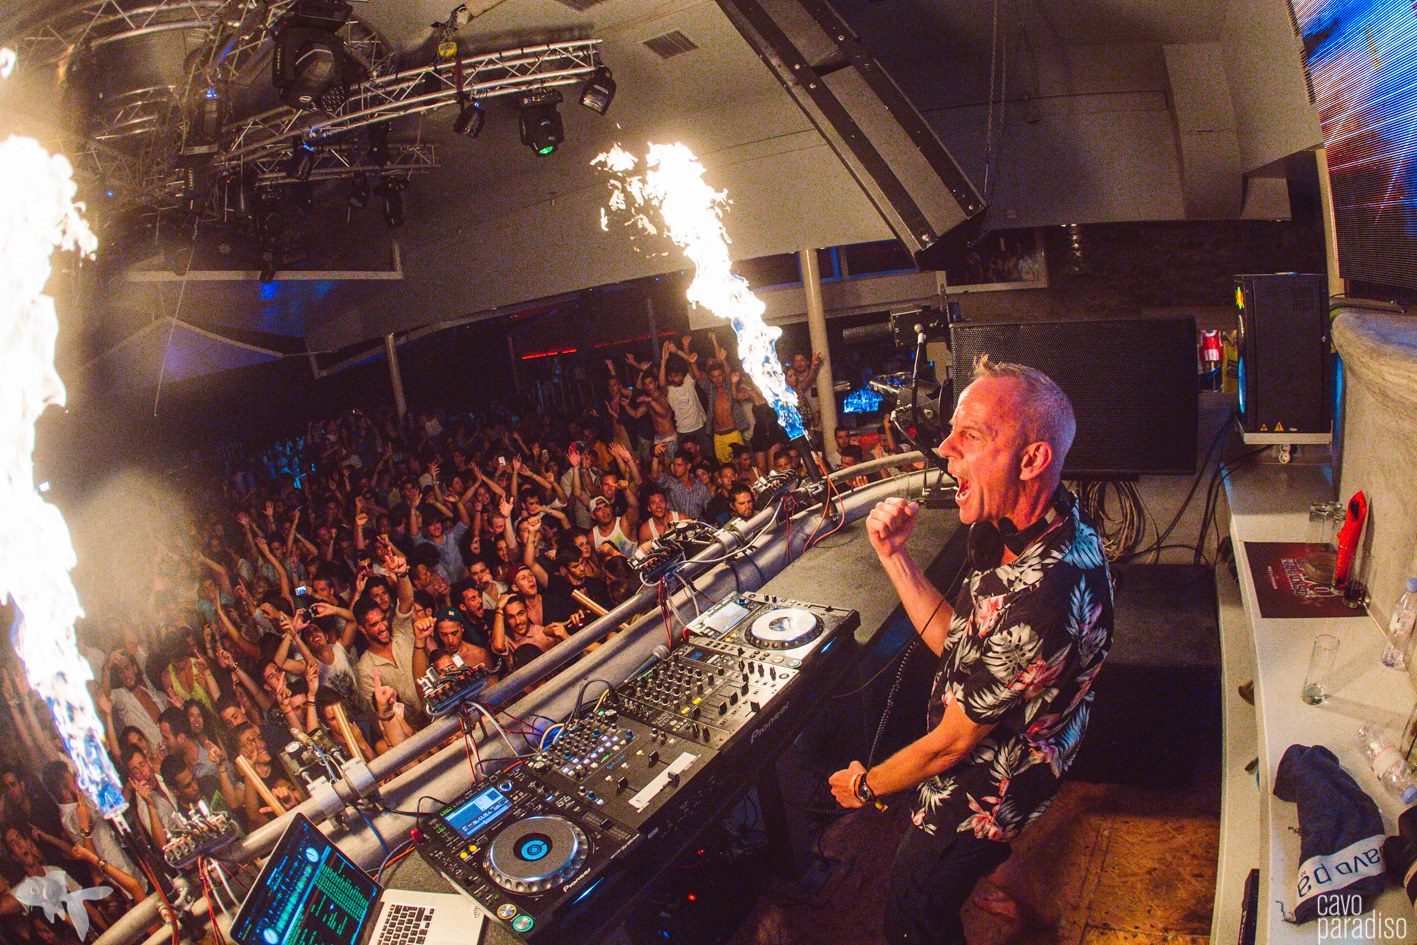 Fatboy Slim made his Cavo Paradiso debut to a slam-packed dancefloor this past July. 